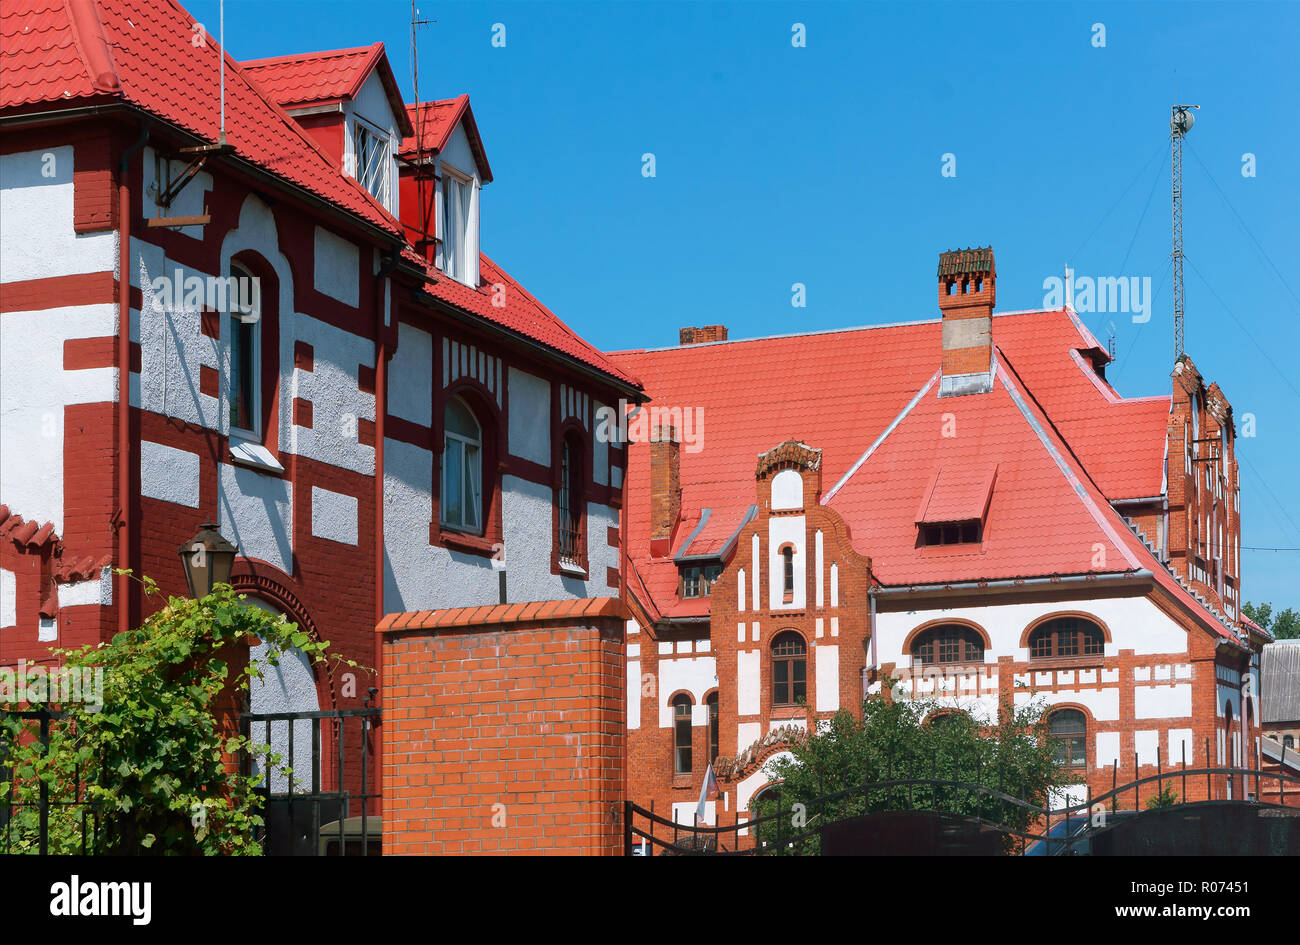 August 9, 2018, Kaliningrad region, Baltiysk, Russia,Water tower infantry barracks, the building of the Baltic fleet of the Russian Federation Stock Photo